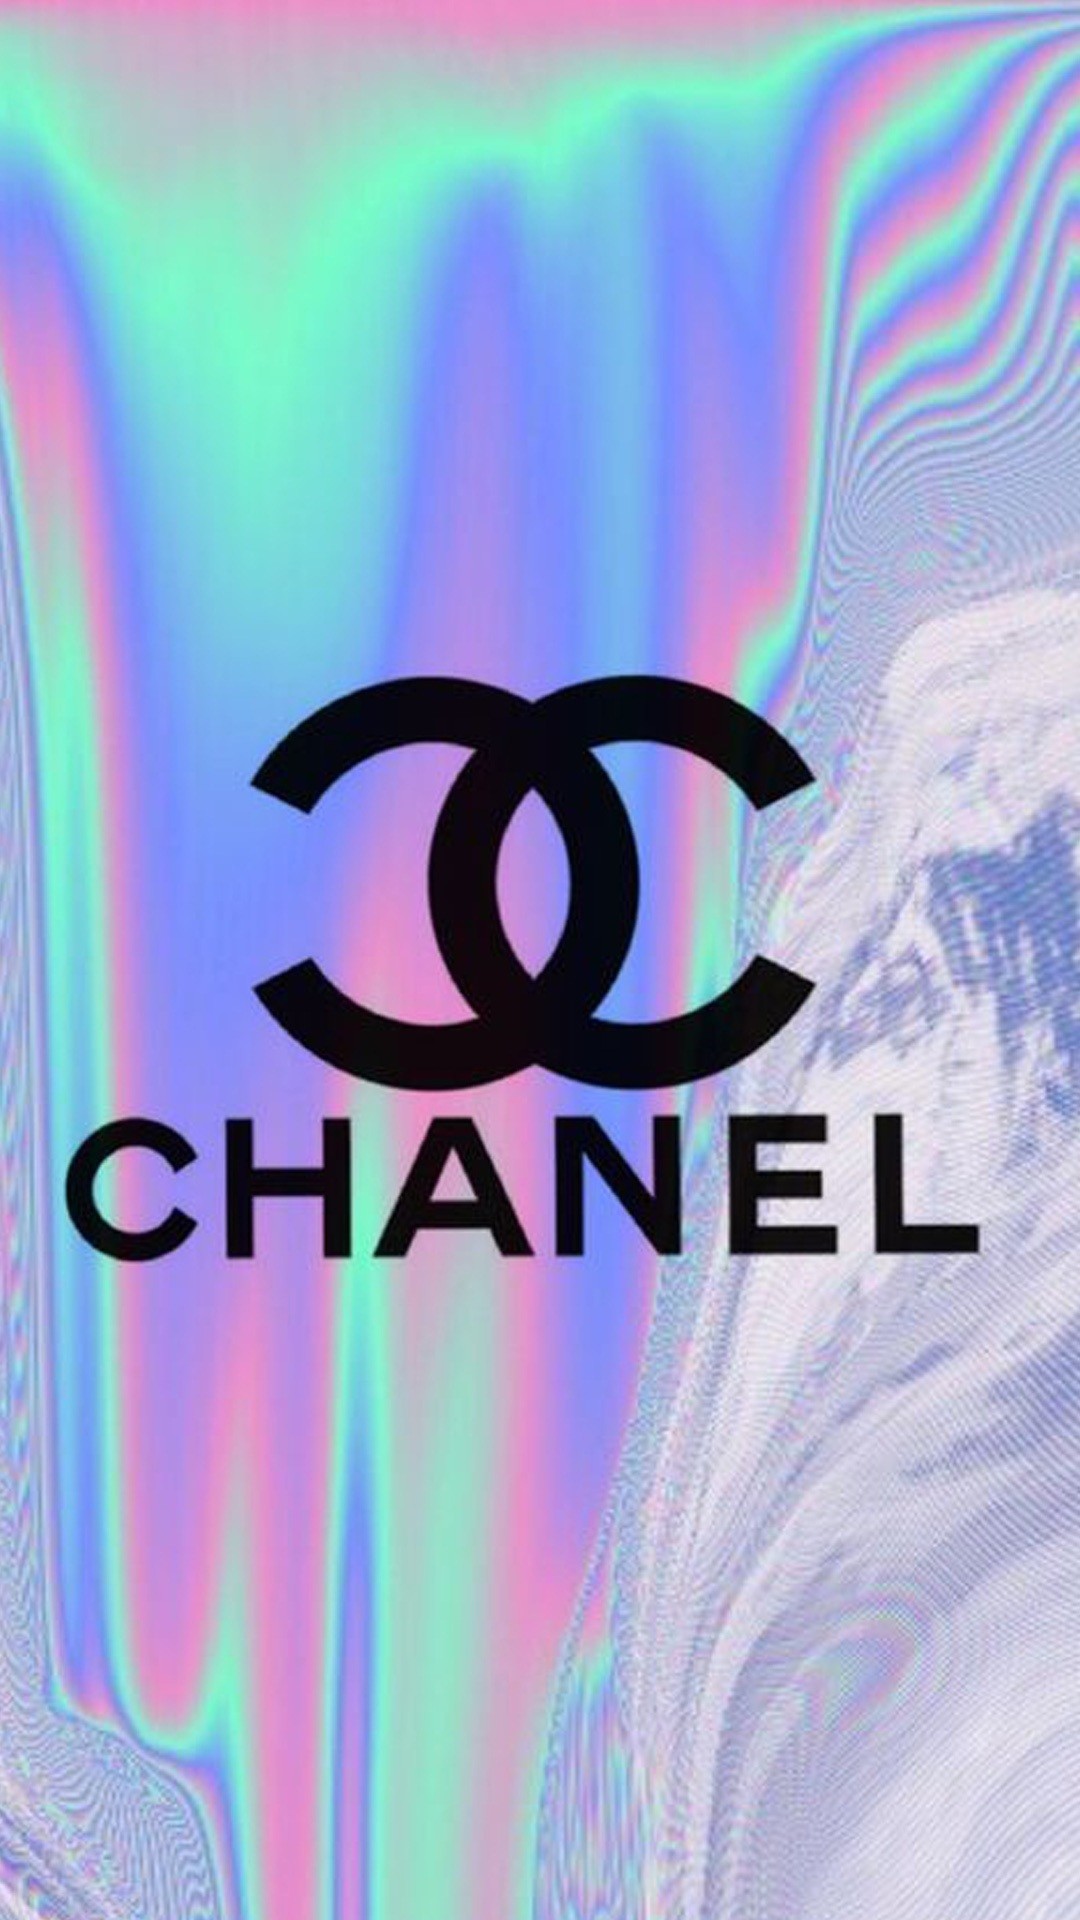 Chanel Wallpaper for iPhone (62+ images)